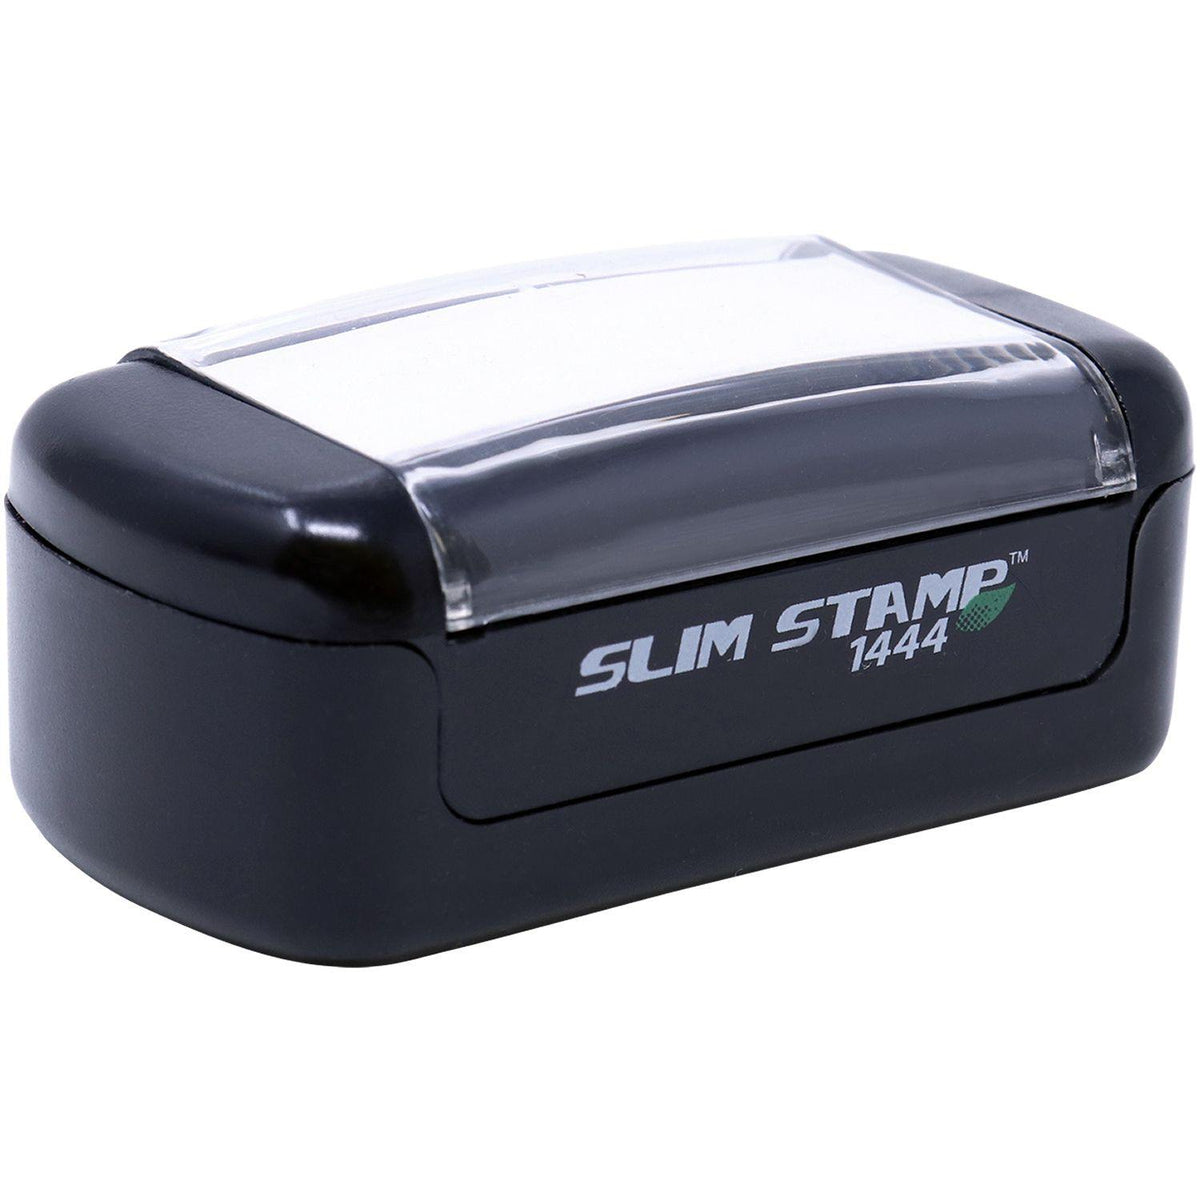 Alt View of Slim Pre-Inked For Official Use Only Stamp Mount Angle